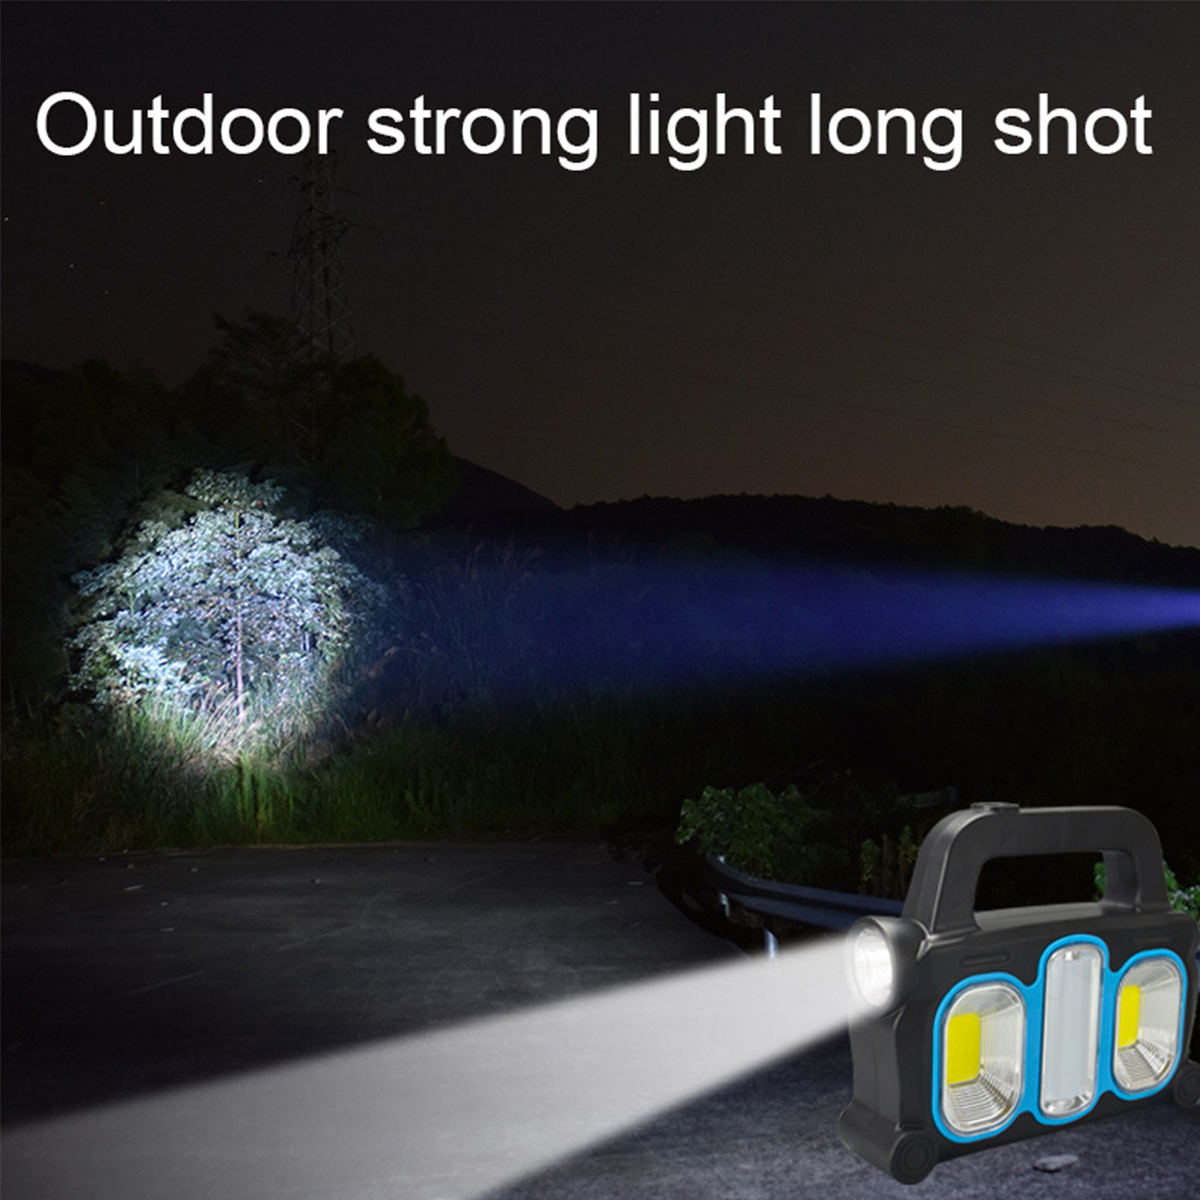 COB-LED-Solar-Work-Lights-IP65-Waterproof-3-Mode-USB-Rechargeable-Portable-Floodlight-Lamps-Outdoor--1924944-3